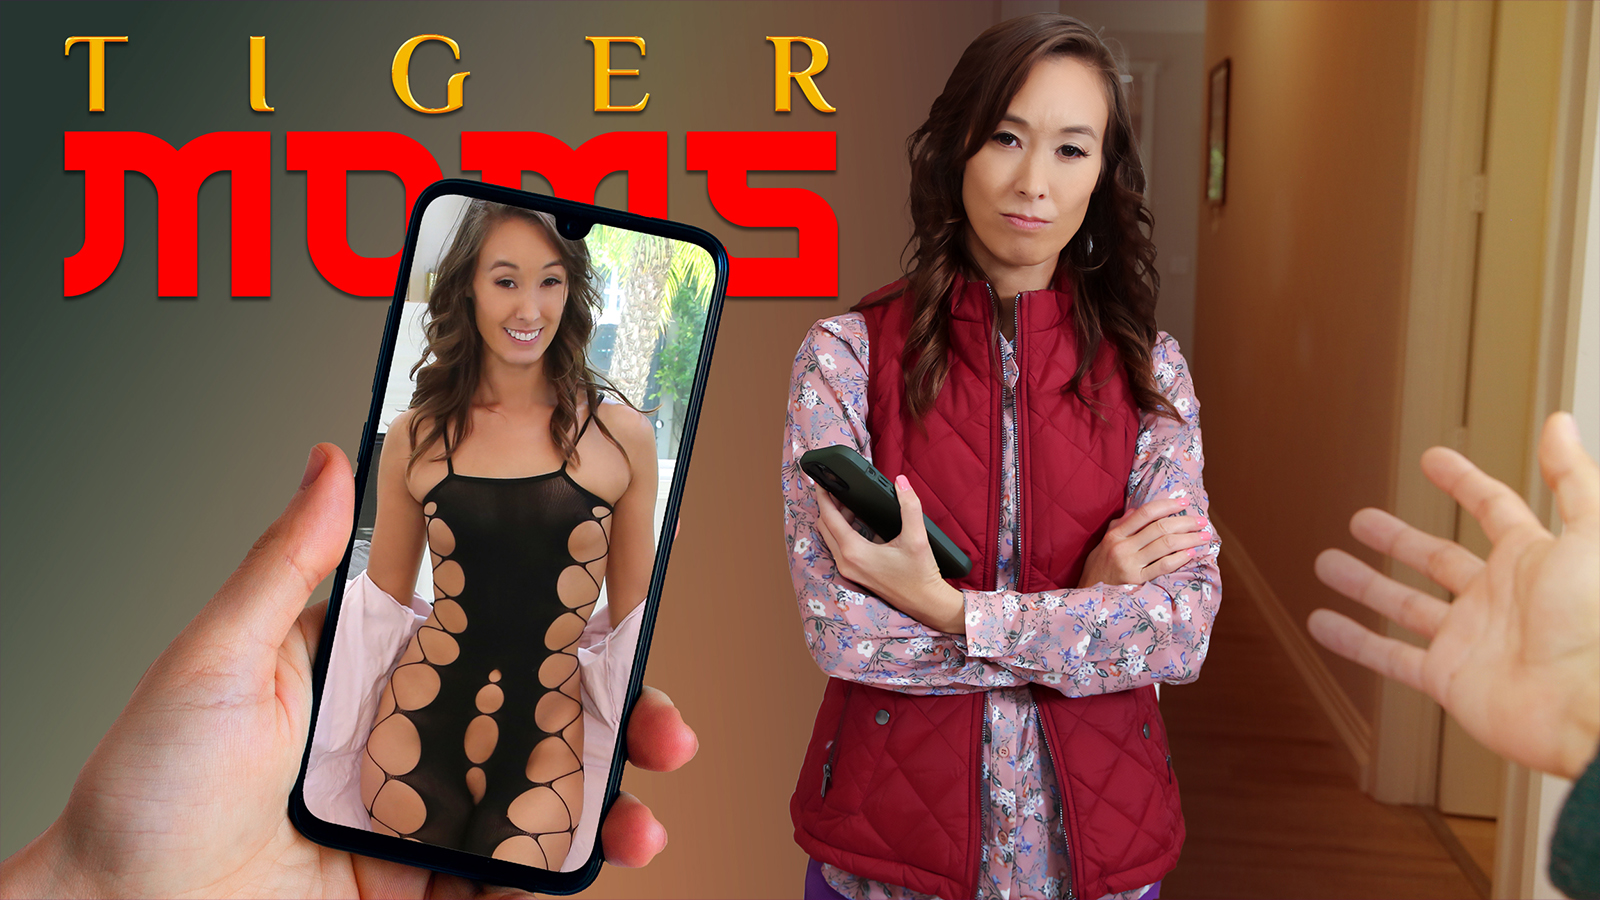 TigerMoms &#8211; Christy Love &#8211; Is There A Doctor In The House?